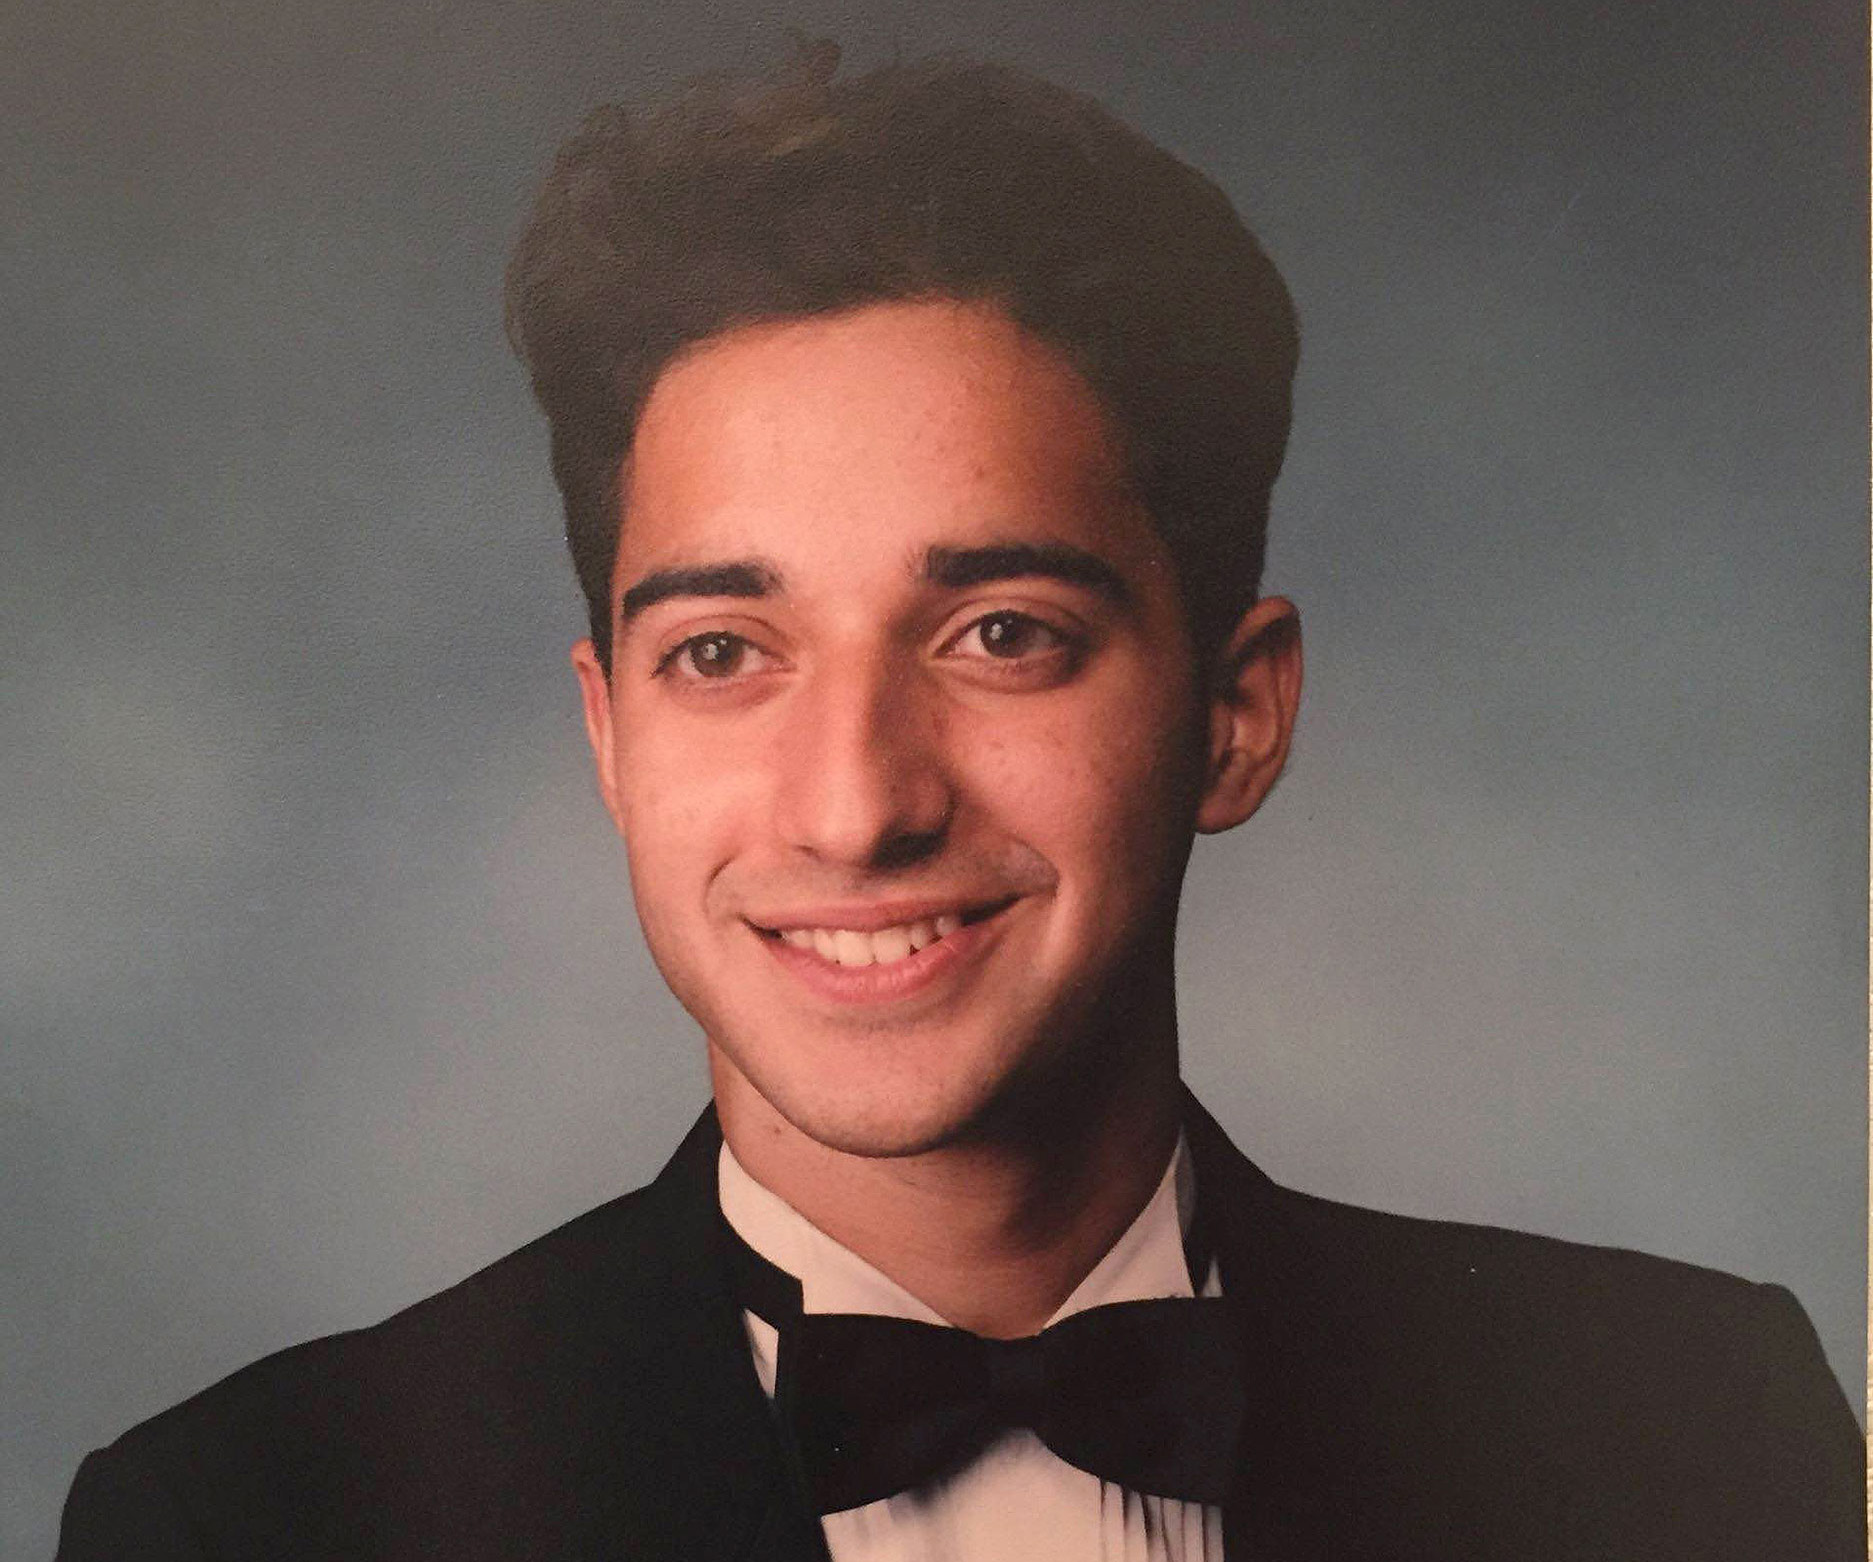 Shocking photos: This is what Adnan Syed looks like now